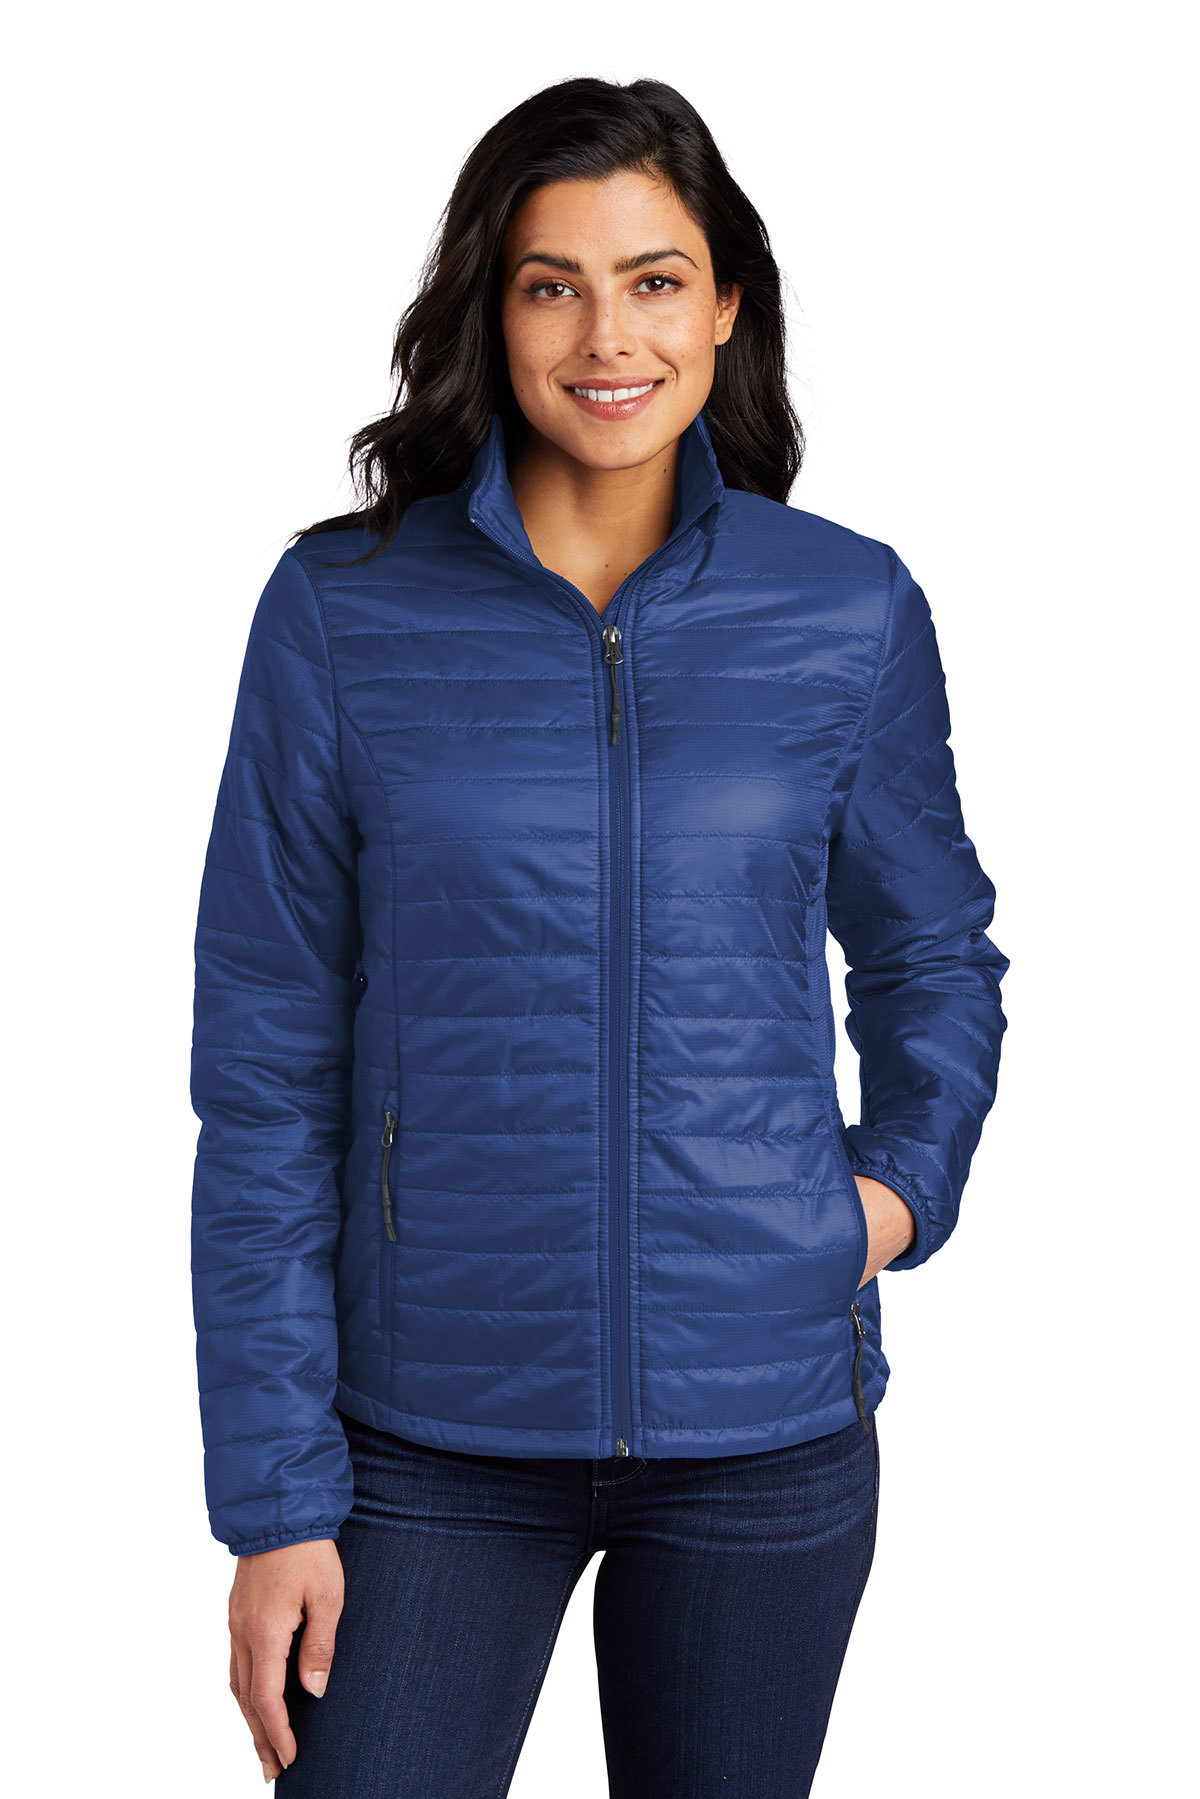 Port Authority Ladies Packable Puffy Jacket | Product | SanMar